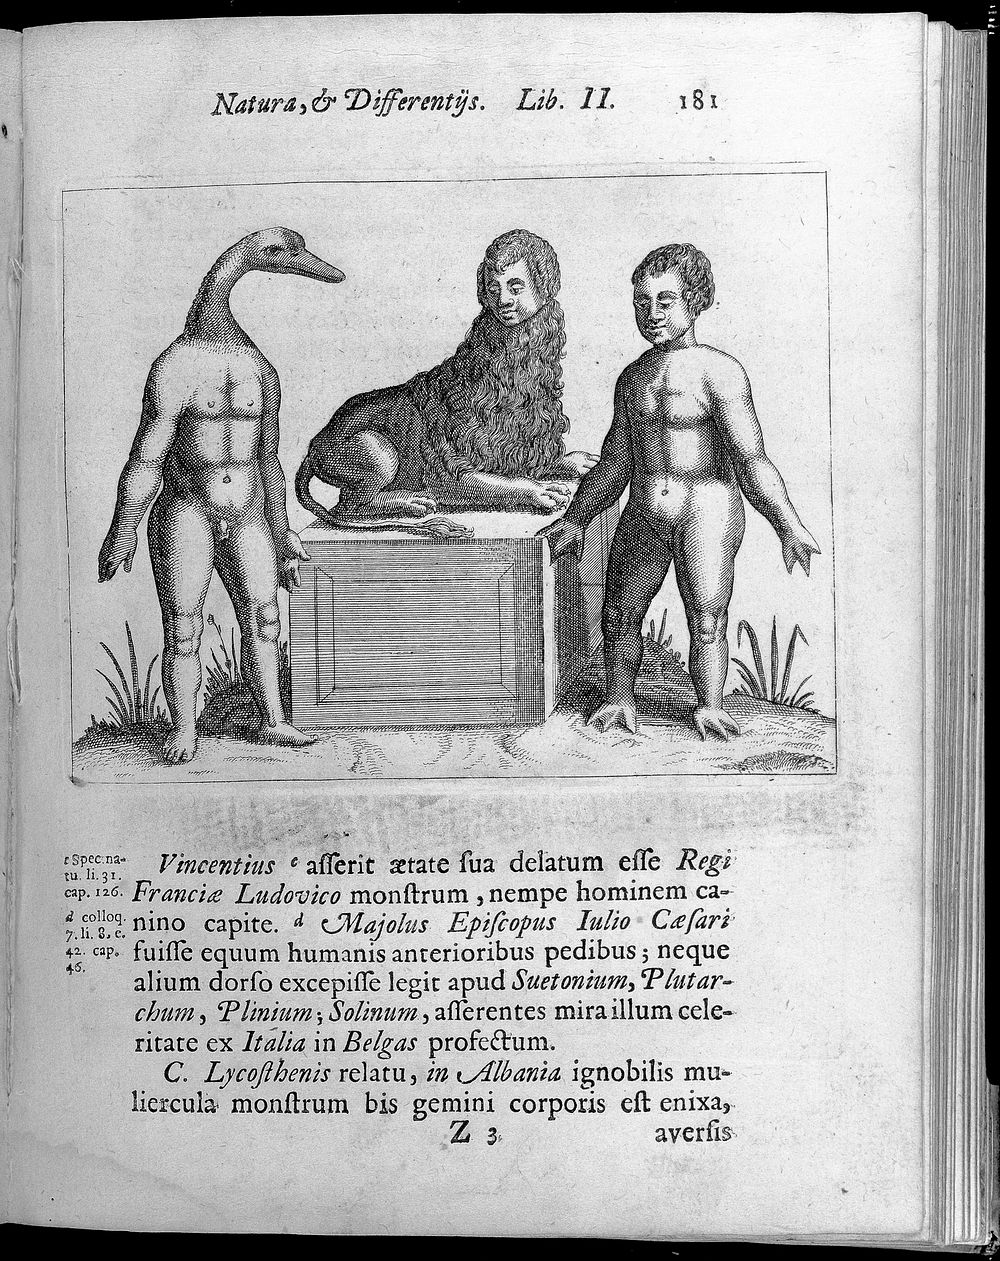 Three figures with abnormalities, One figure has a human body with a ducks head, the second figure has a Lions body with a…